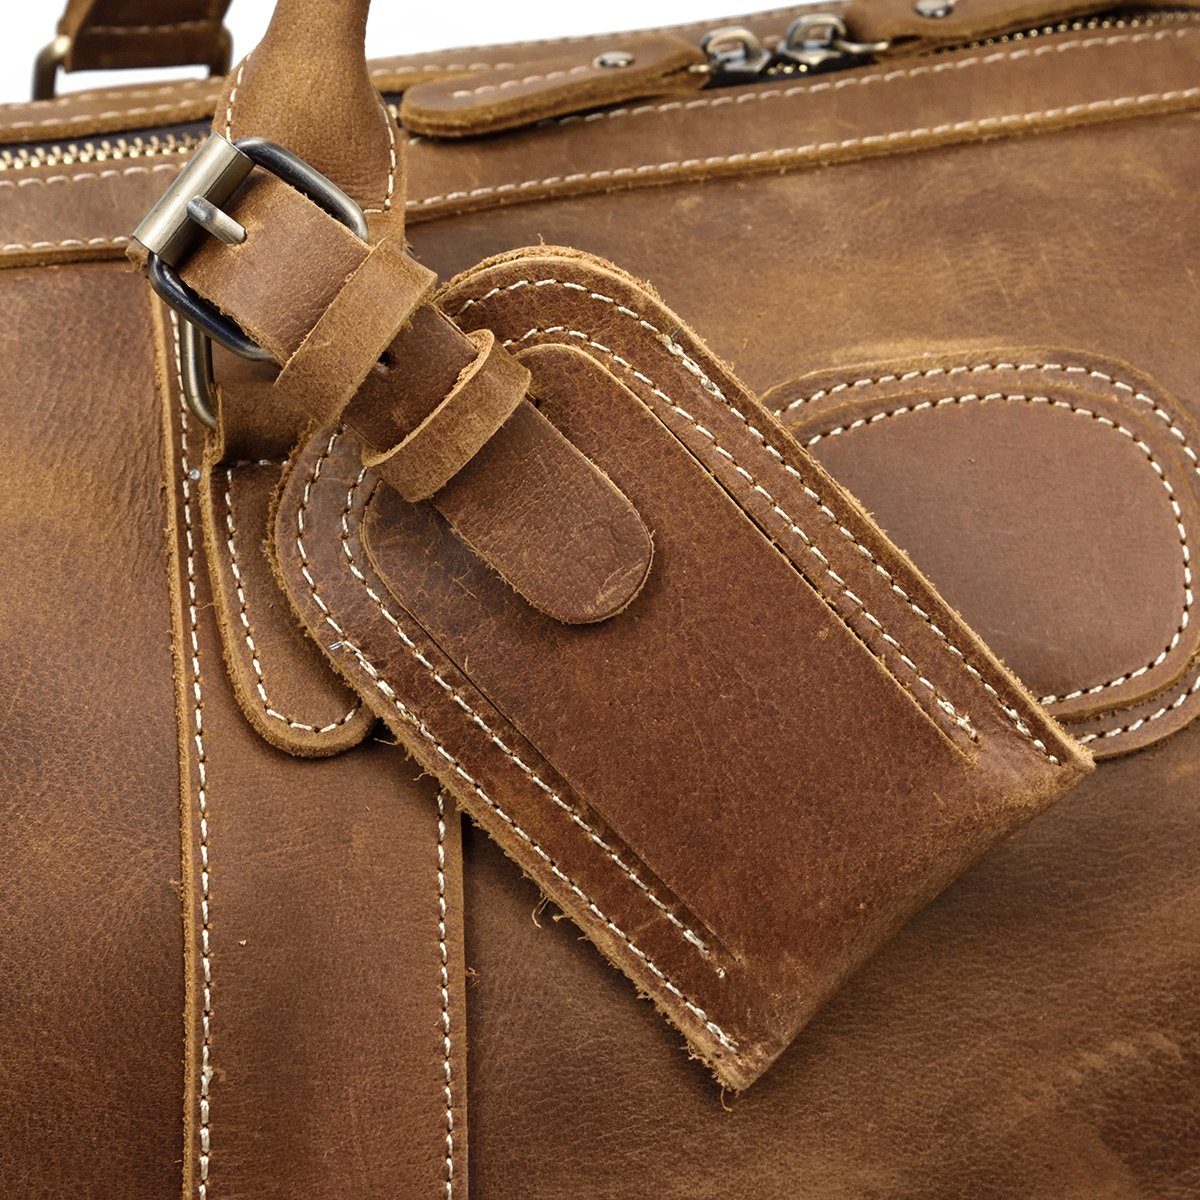 tan leather holdall bag